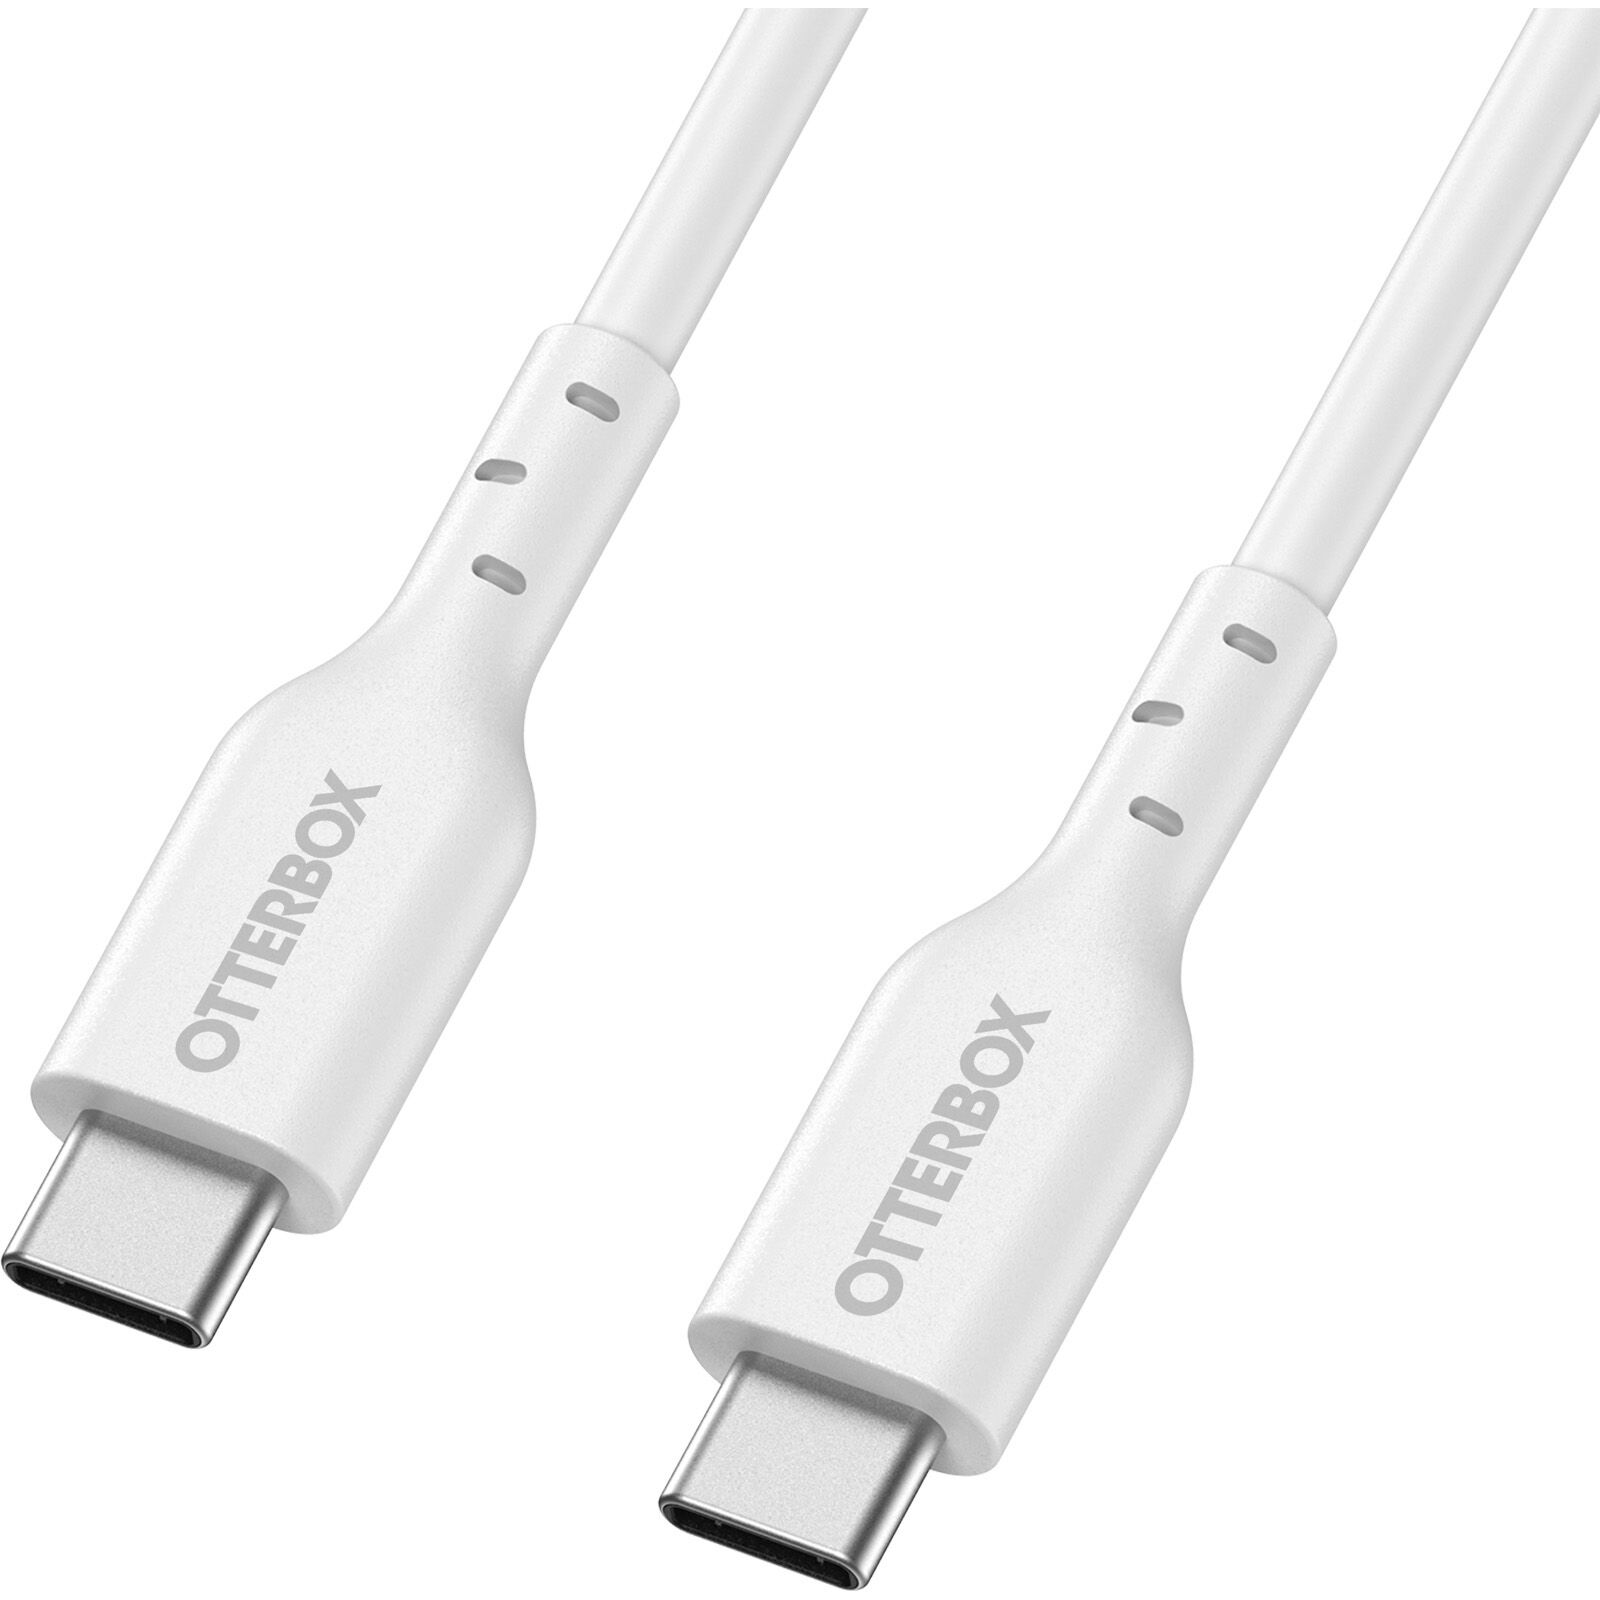 Cable USB-C a USB-C 1 metros Standard Fast Charge blanco